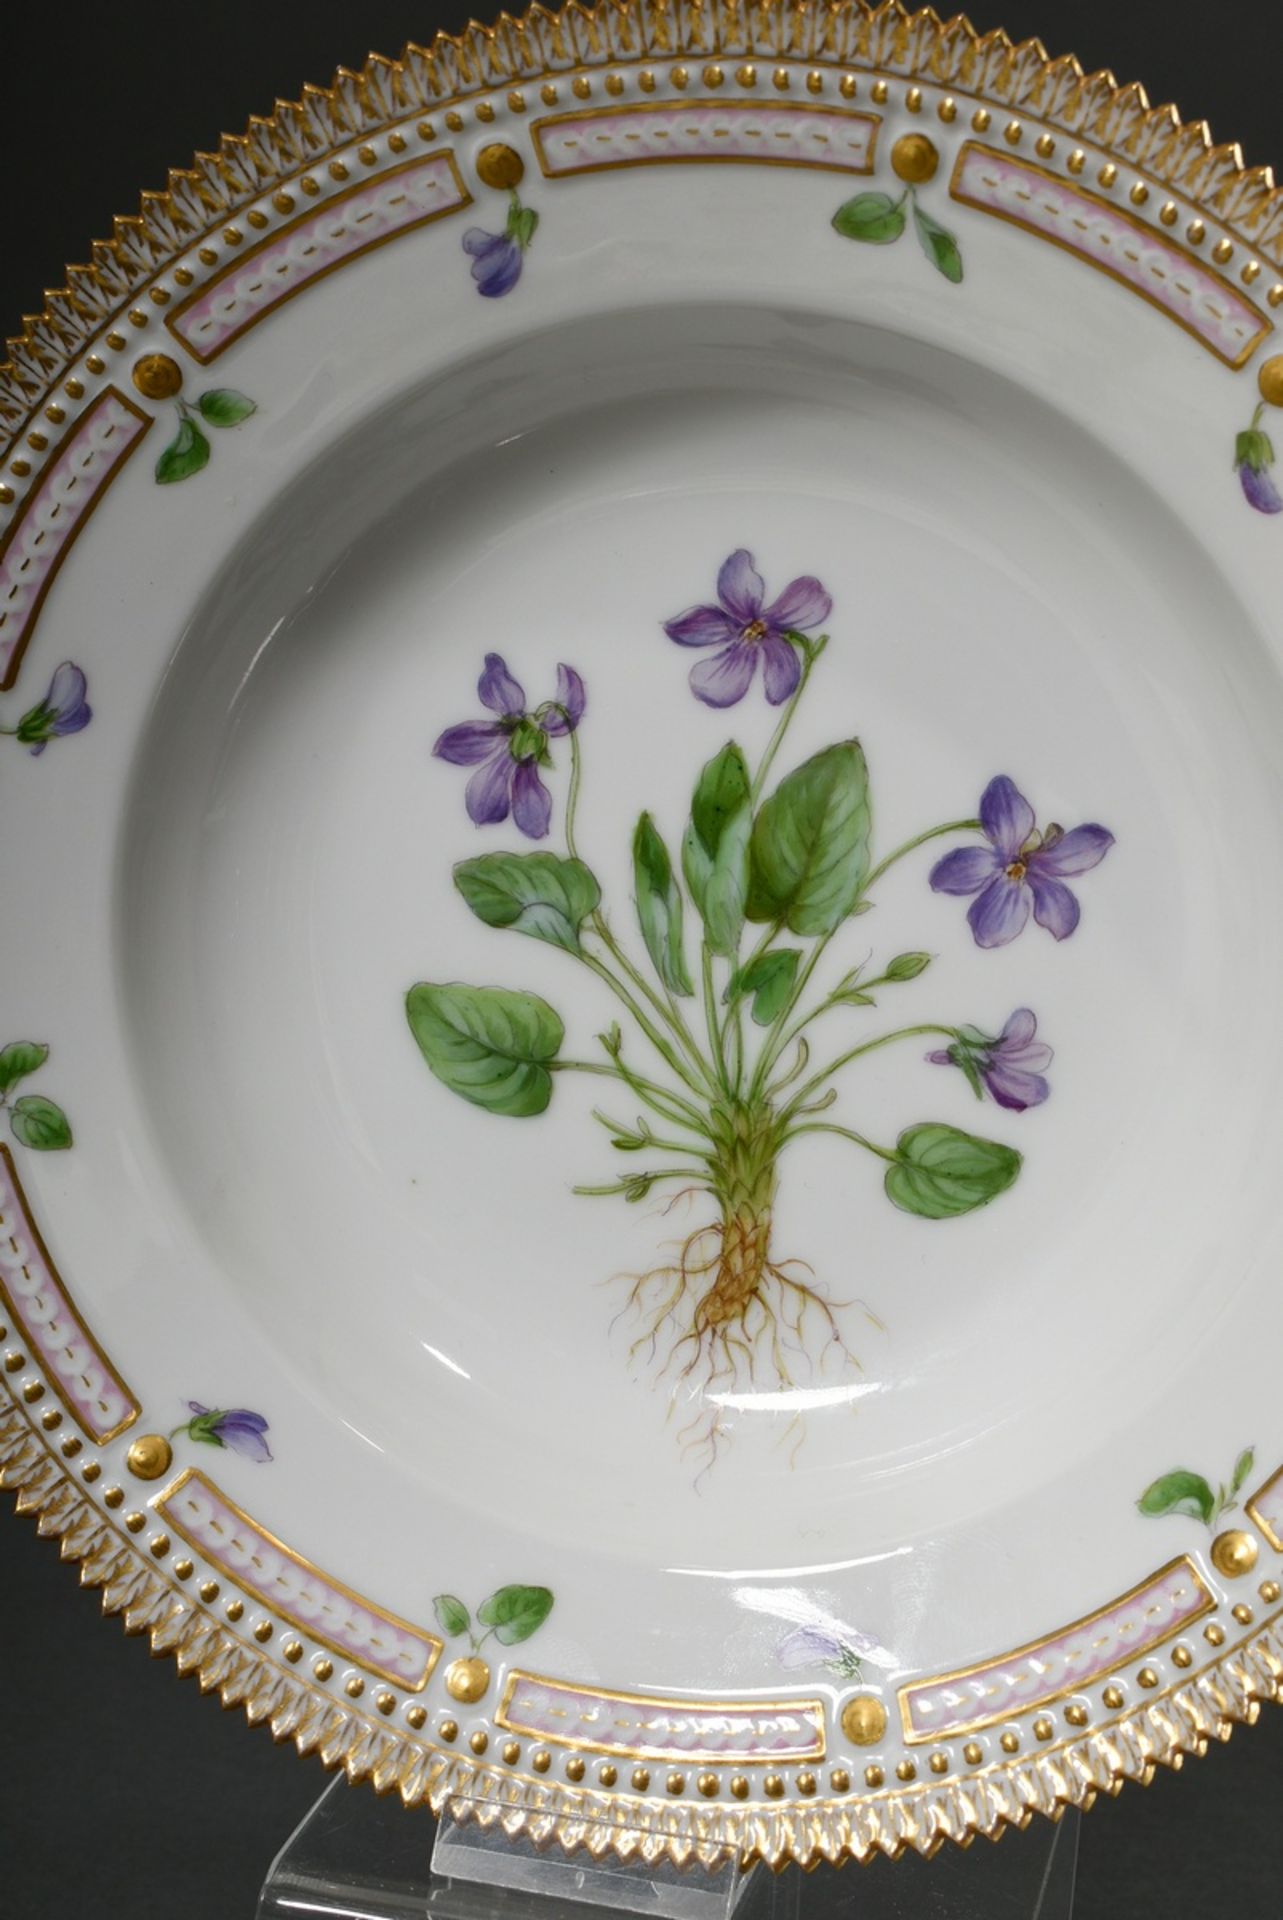 7 Royal Copenhagen "Flora Danica" plate with polychrome painting in the mirror and gold decorated s - Image 17 of 17